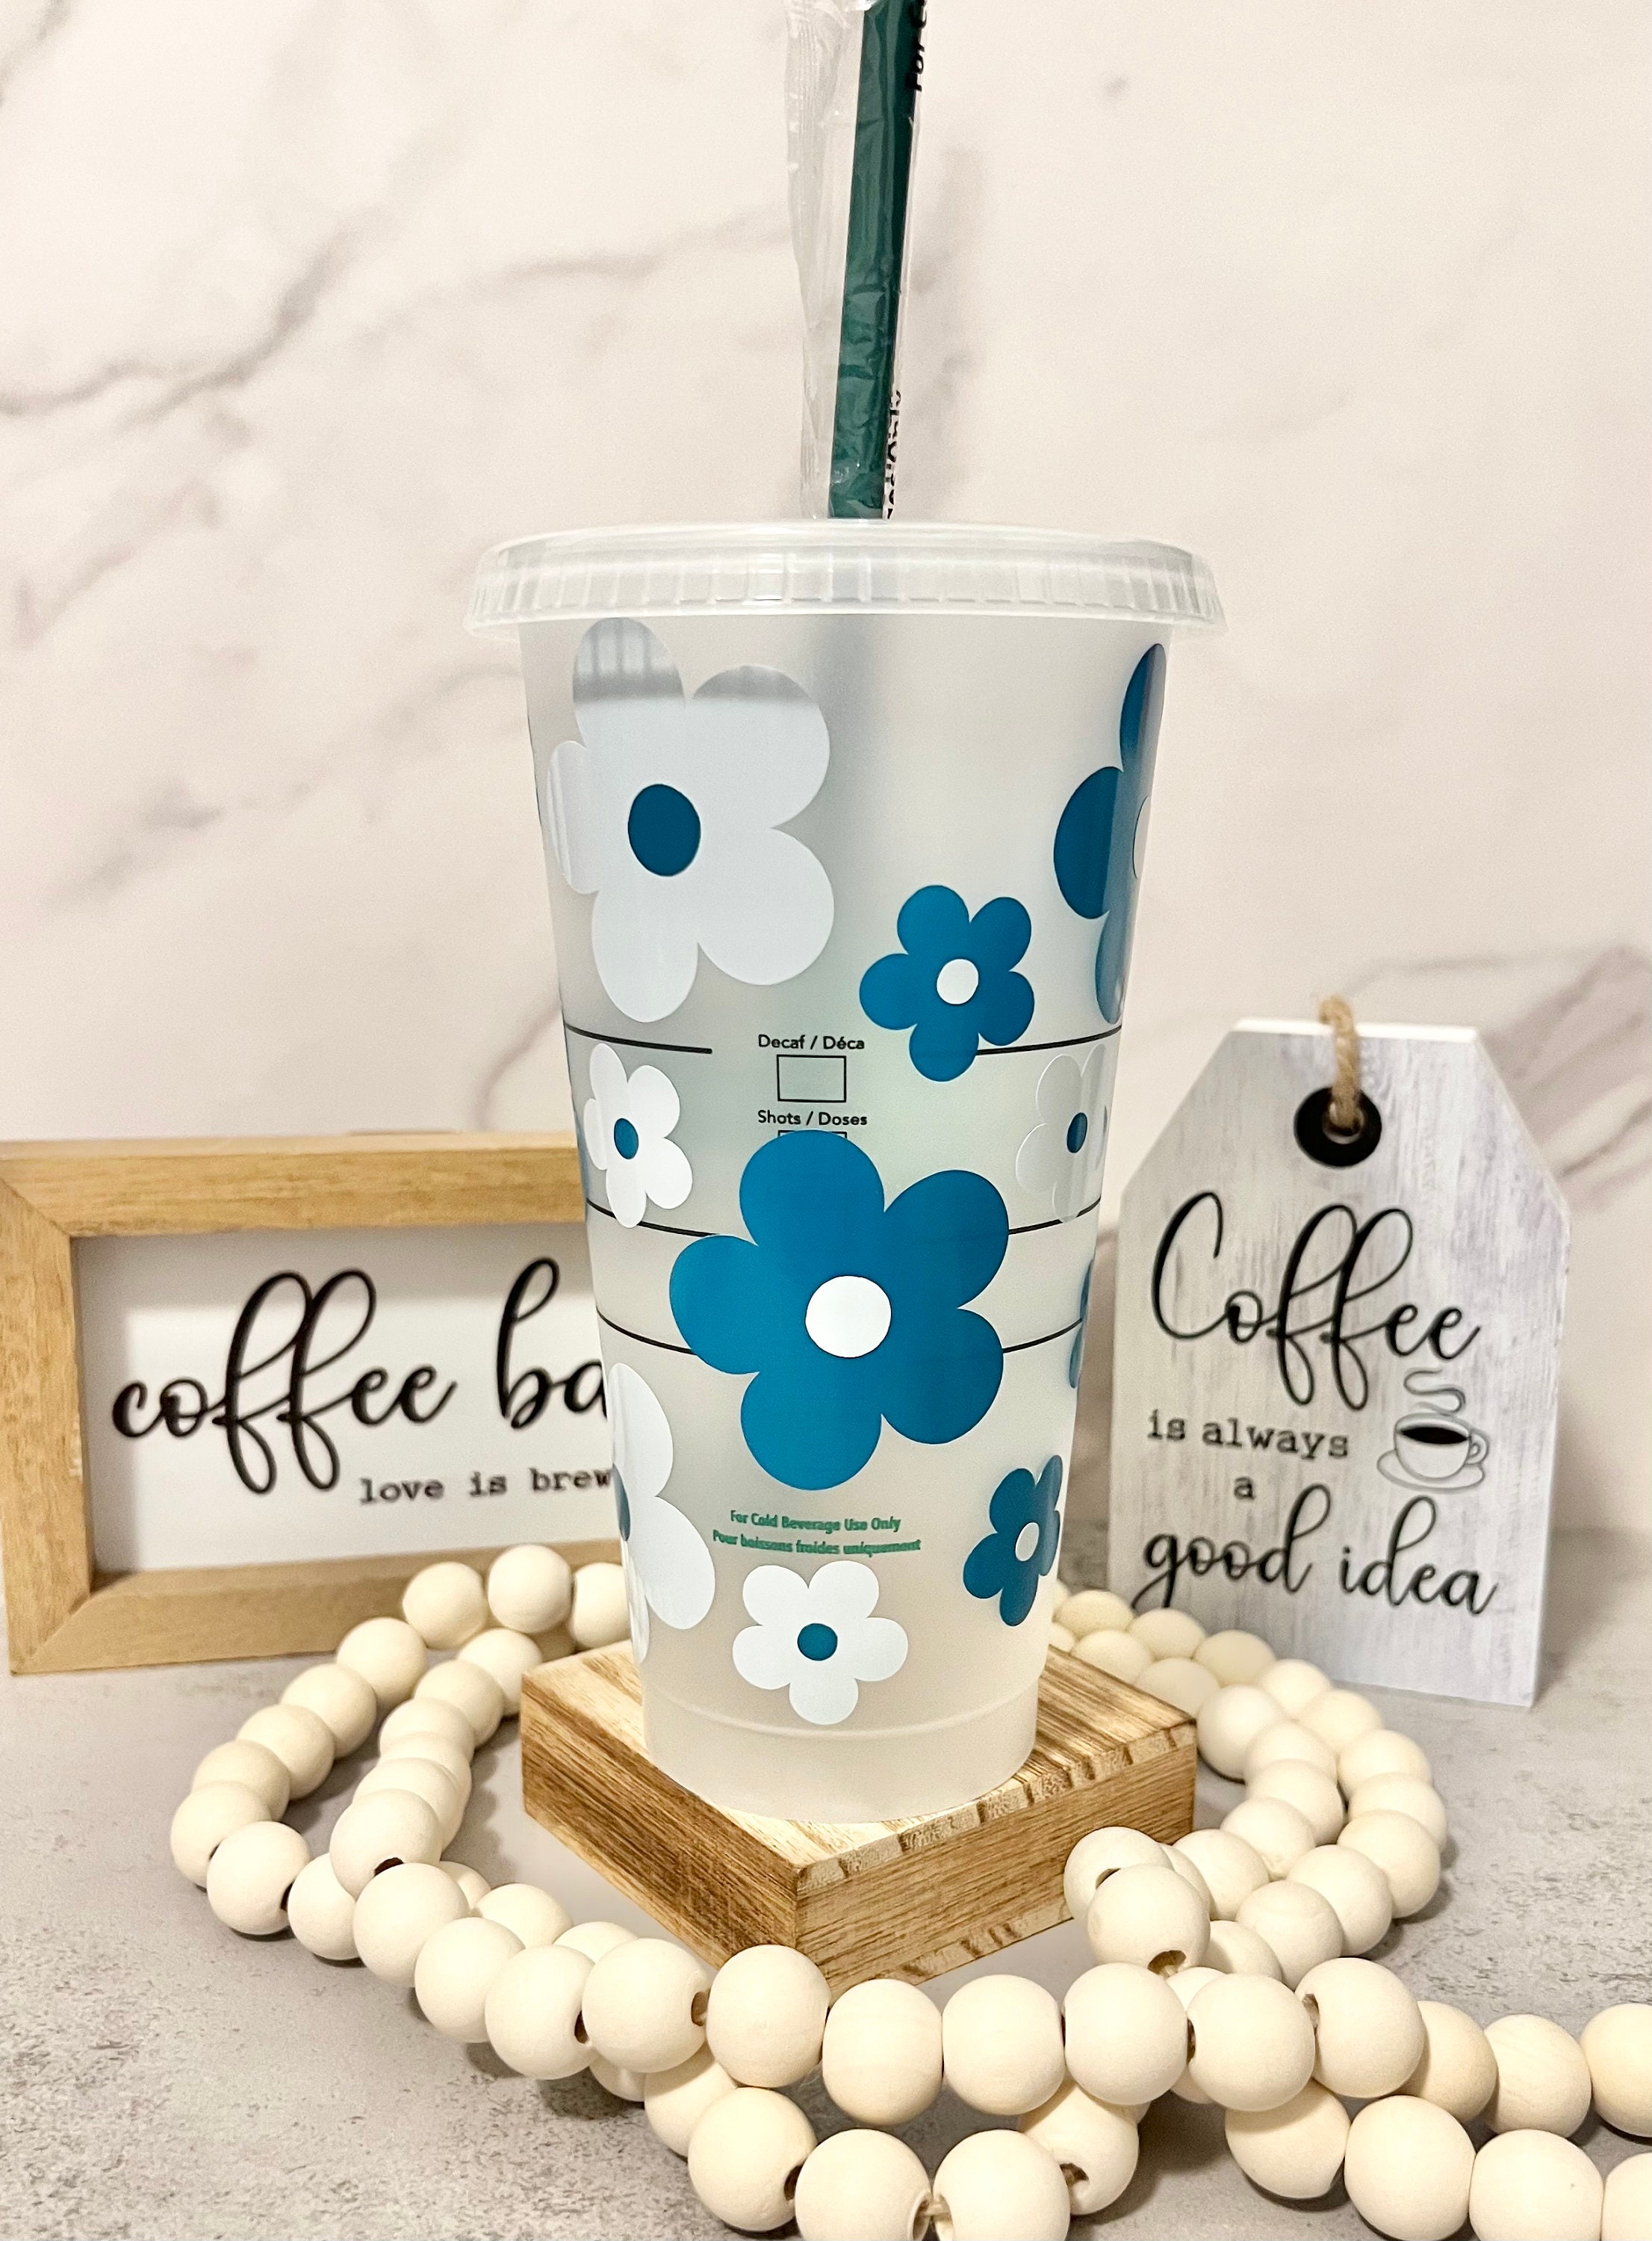 Pink Retro Daisy Starbucks Cup Personalized Starbucks Cold Cup Birthday  Gift Reusable Cup Iced Coffee Cup Starbucks Tumbler 